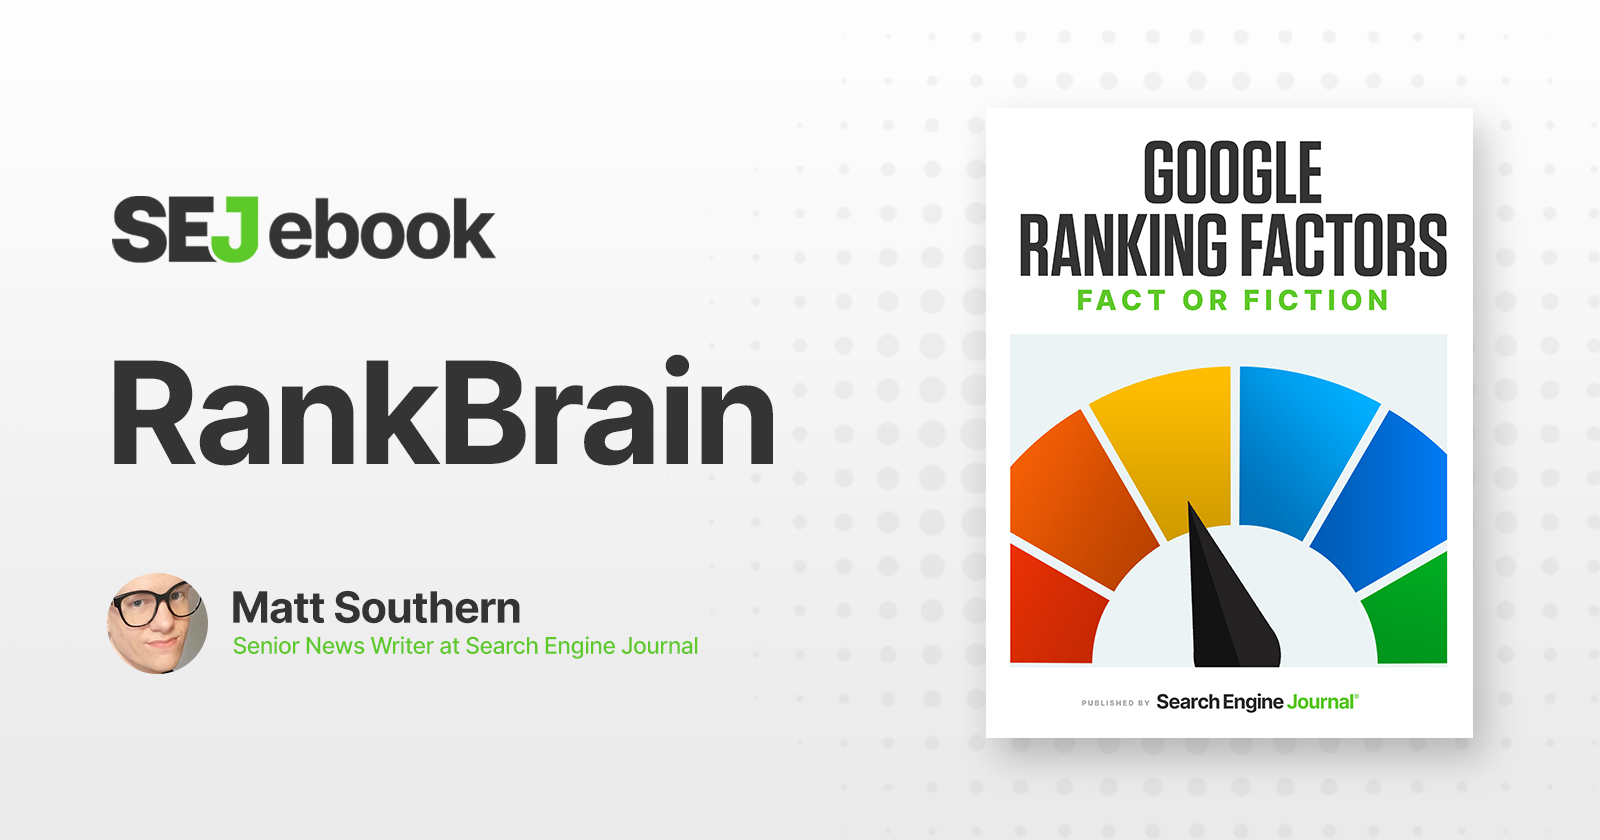 Is RankBrain A Rating Issue?